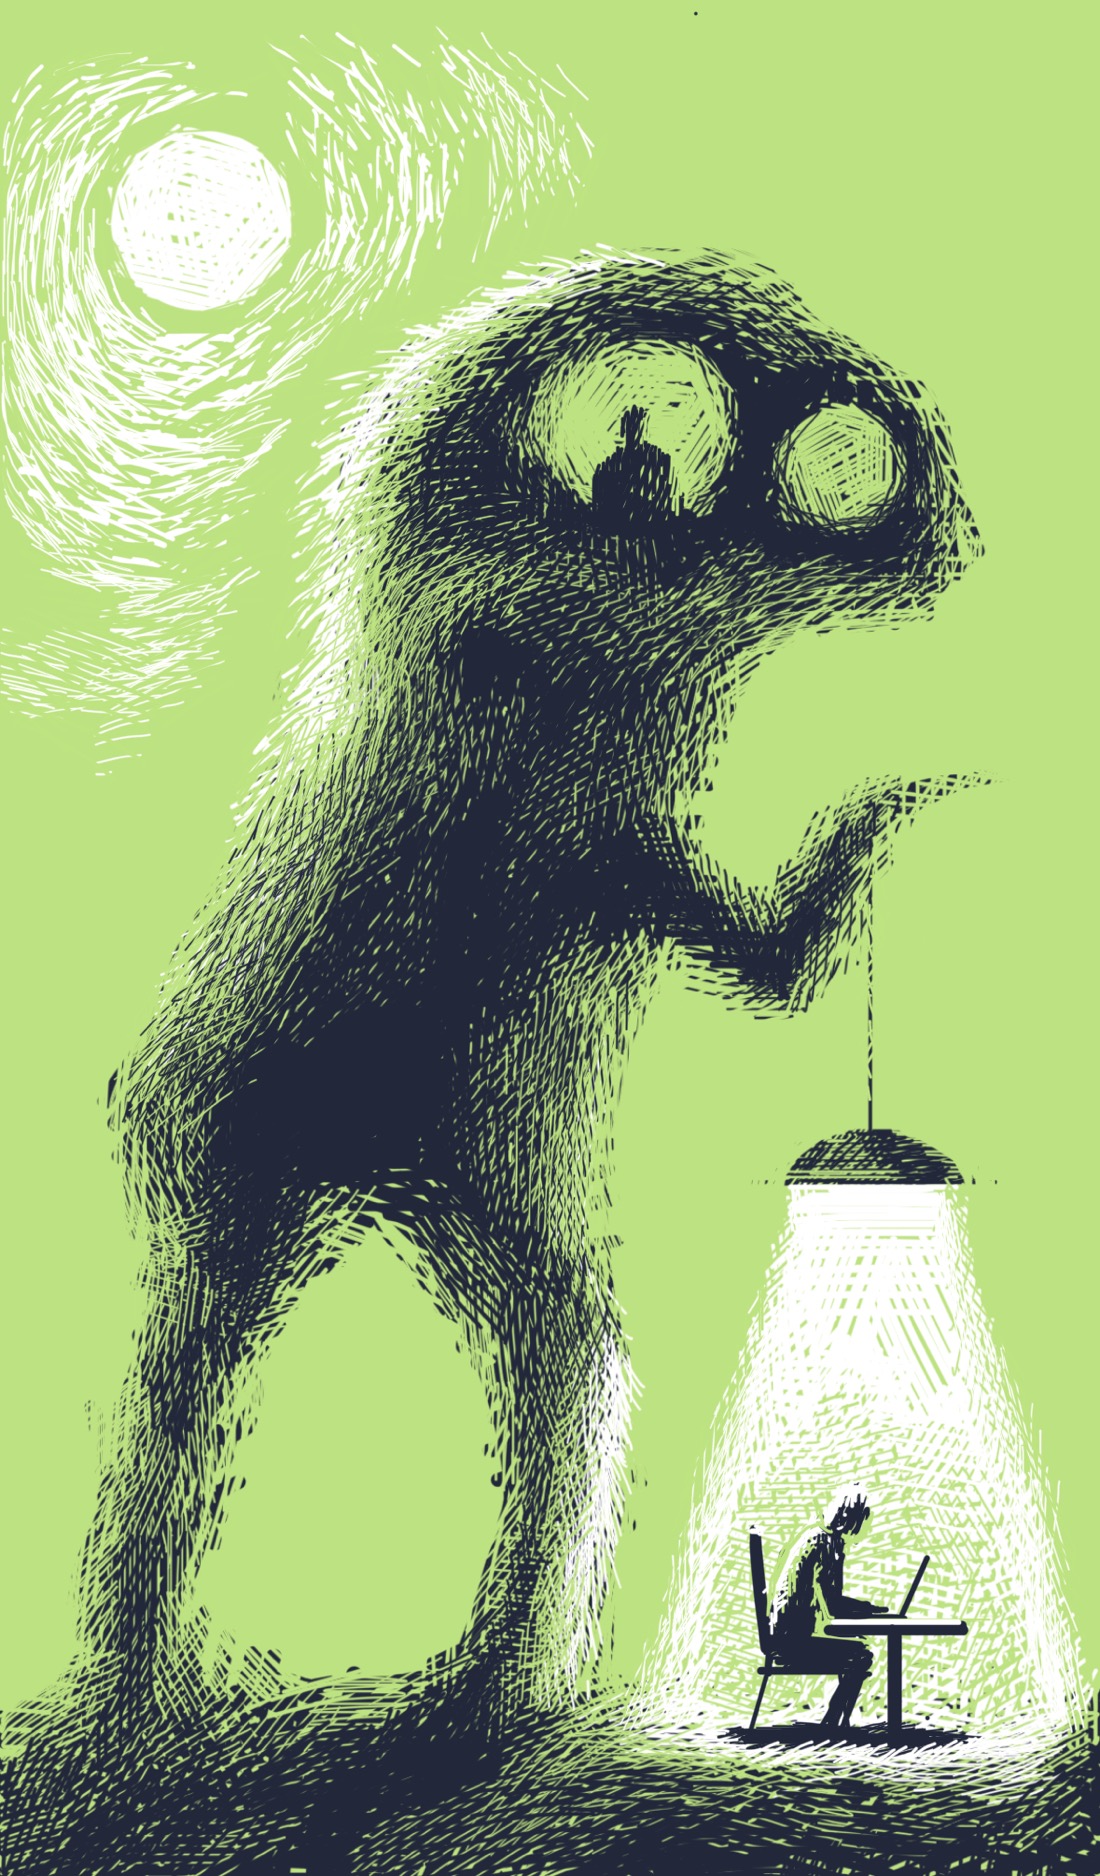 A large, shadowy figure with huge eyes and a head that doesn't look quite human stands in the moonlight. The silhouette of a person is visible in one of its eyes, as though someone is standing inside the head, looking out. From one of its hands dangles an overhead light, like something you'd find in a kitchen. The light illuminates a person sitting at a table, using a laptop. The light is white, and inhumanly bright; more like a spotlight than a house lamp.